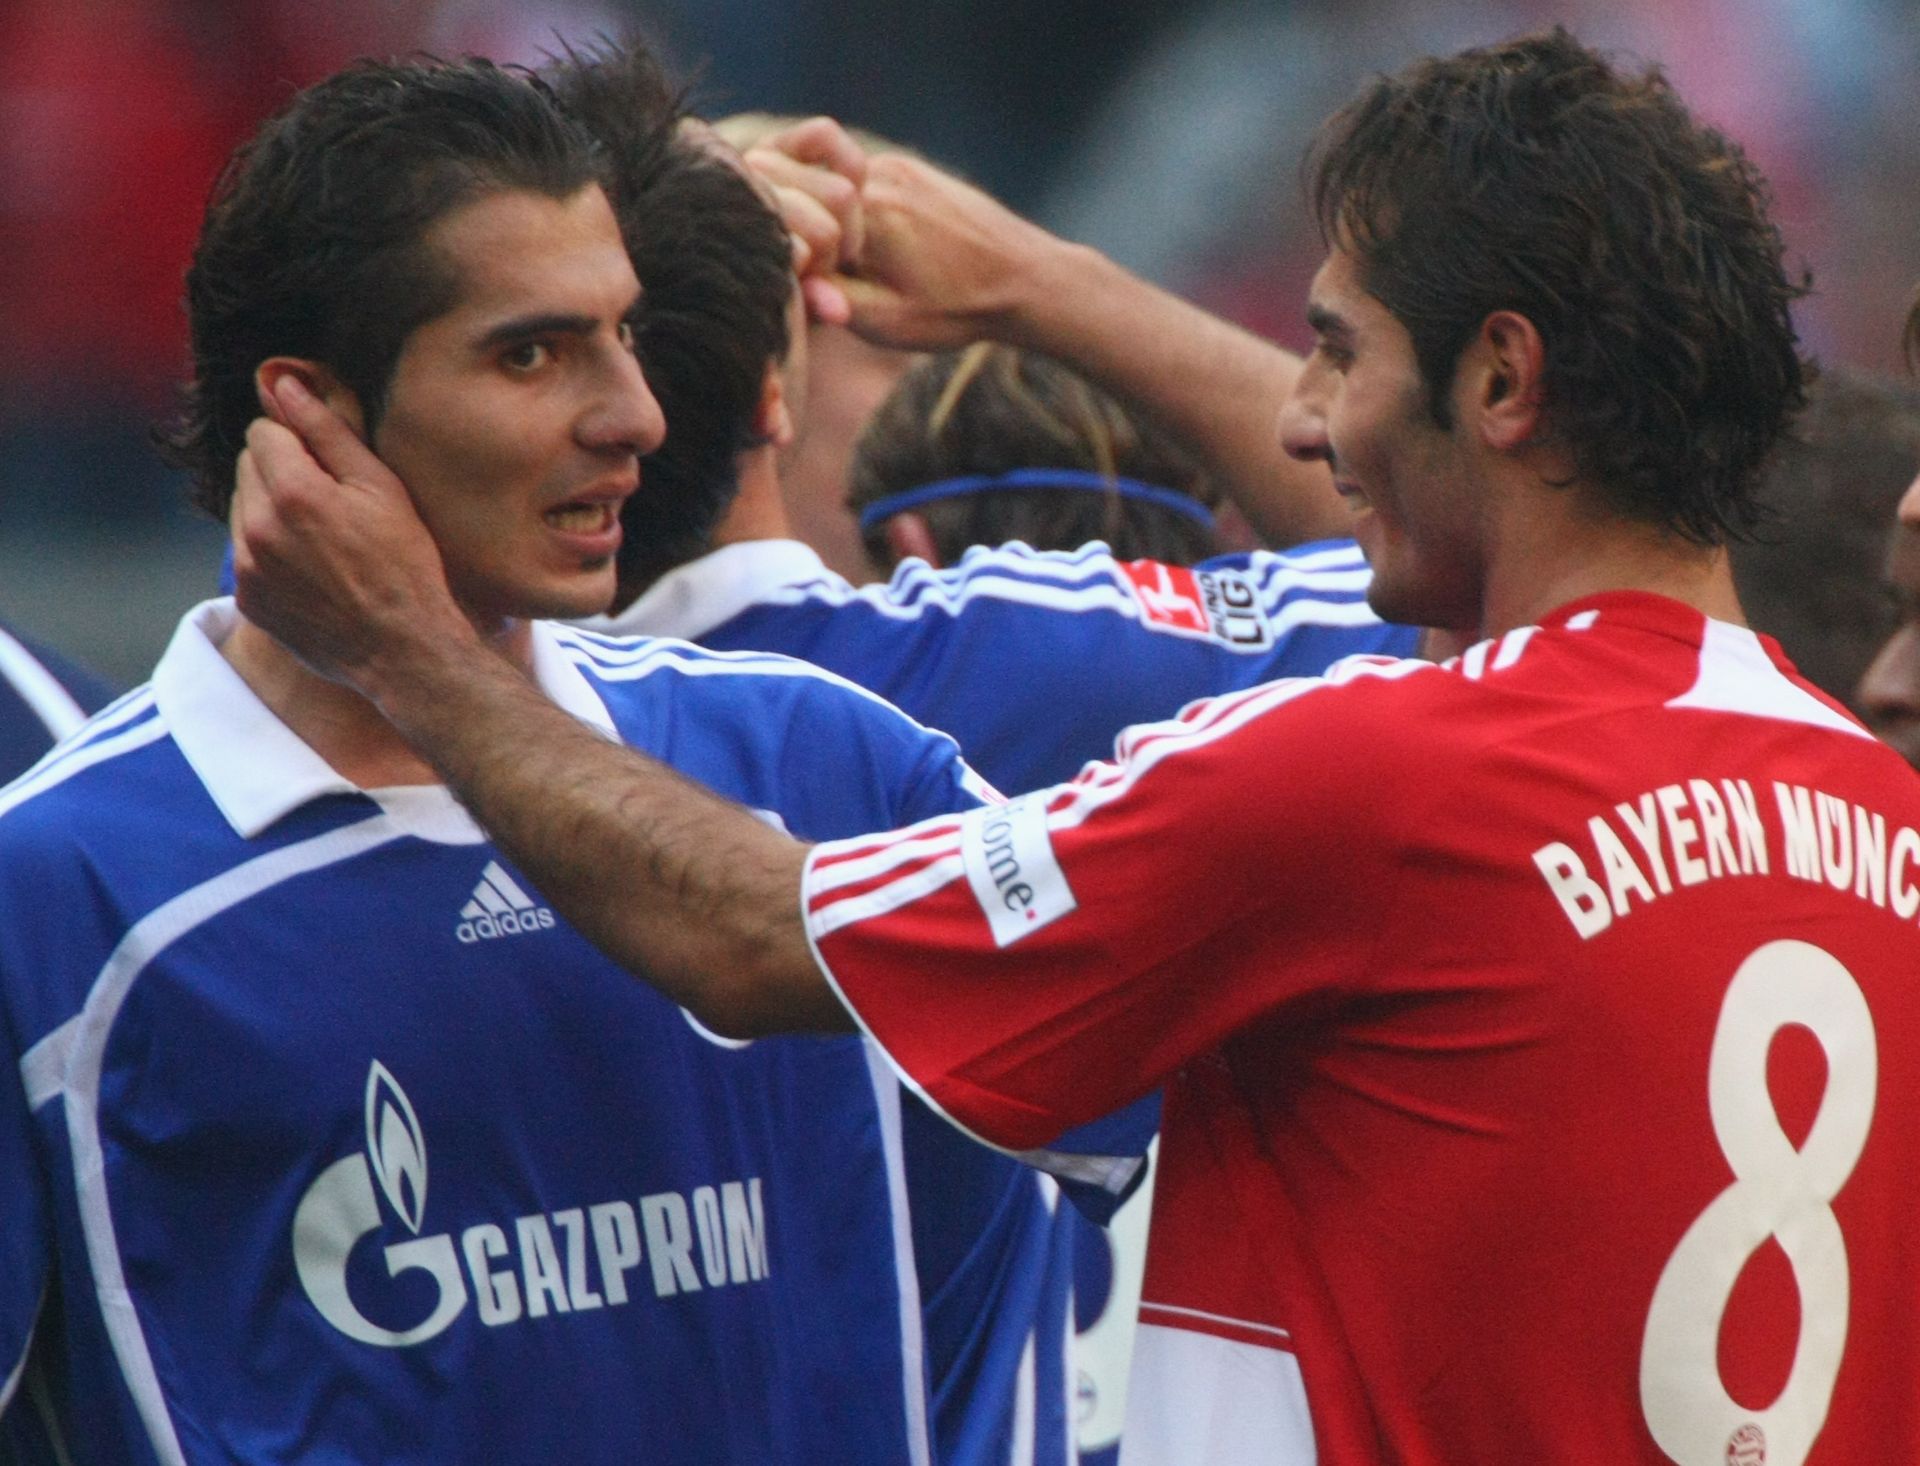 <p>                     Halil and Hamit Altintop were born in Germany and spent much of their careers in the Bundesliga, but the pair played internationally for Turkey.                   </p>                                      <p>                     Hamit was the more successful of the twins, representing Bayern Munich and Real Madrid after leaving Schalke, where he played alongside his brother for a season. The midfielder also won 82 Turkey caps, while the more attack-minded Halil was capped 38 times.                   </p>